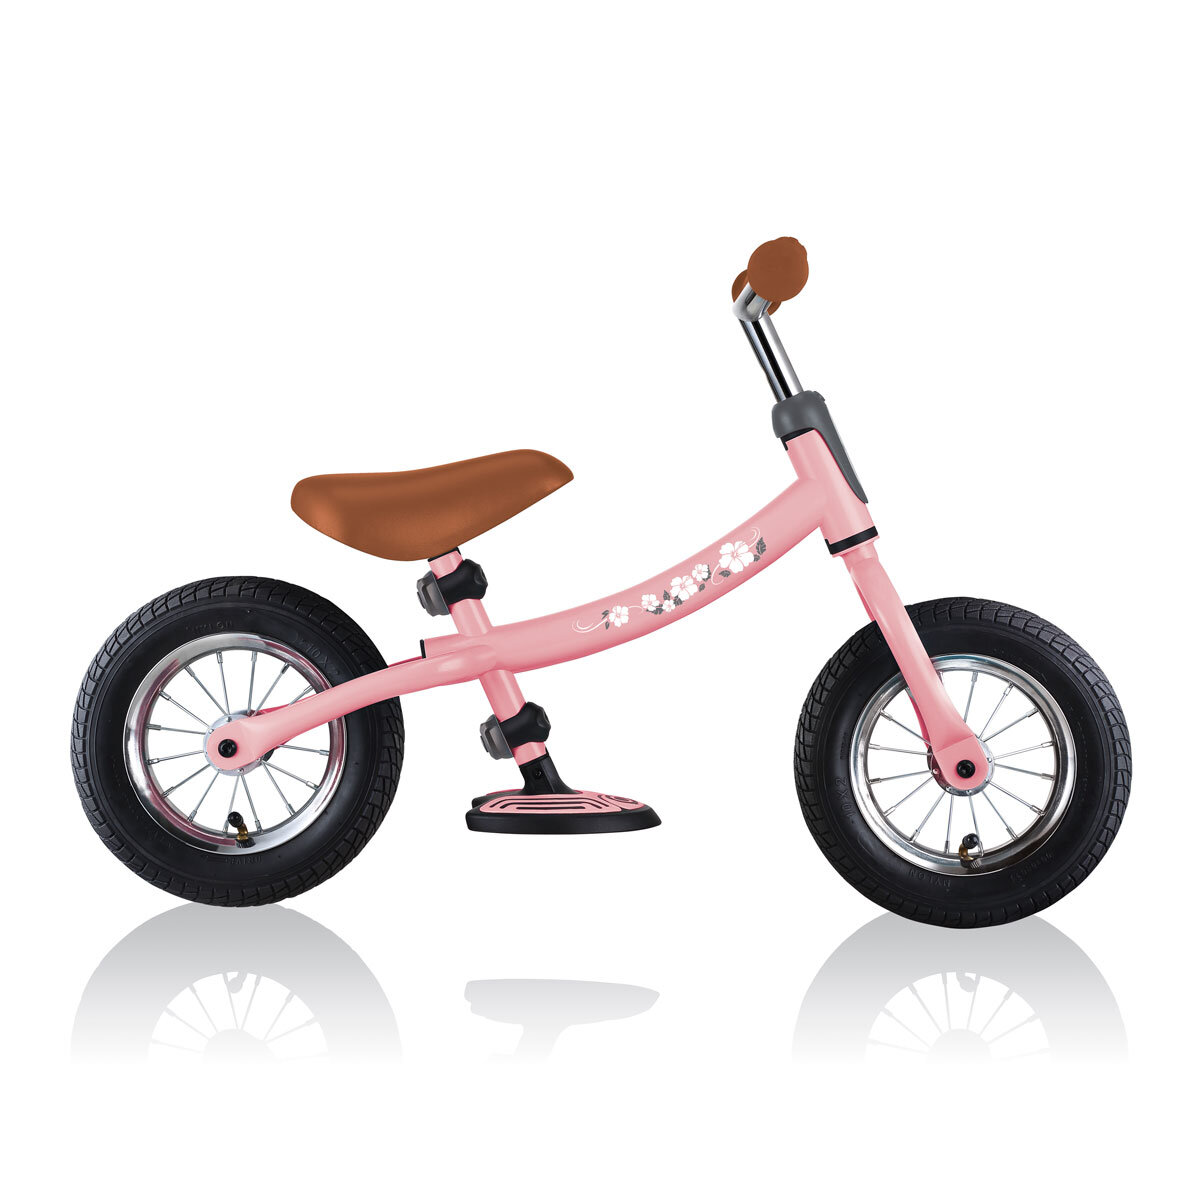 Buy Globber Go Bike Air Pastel Pink Overview5 Image at Costco.co.uk